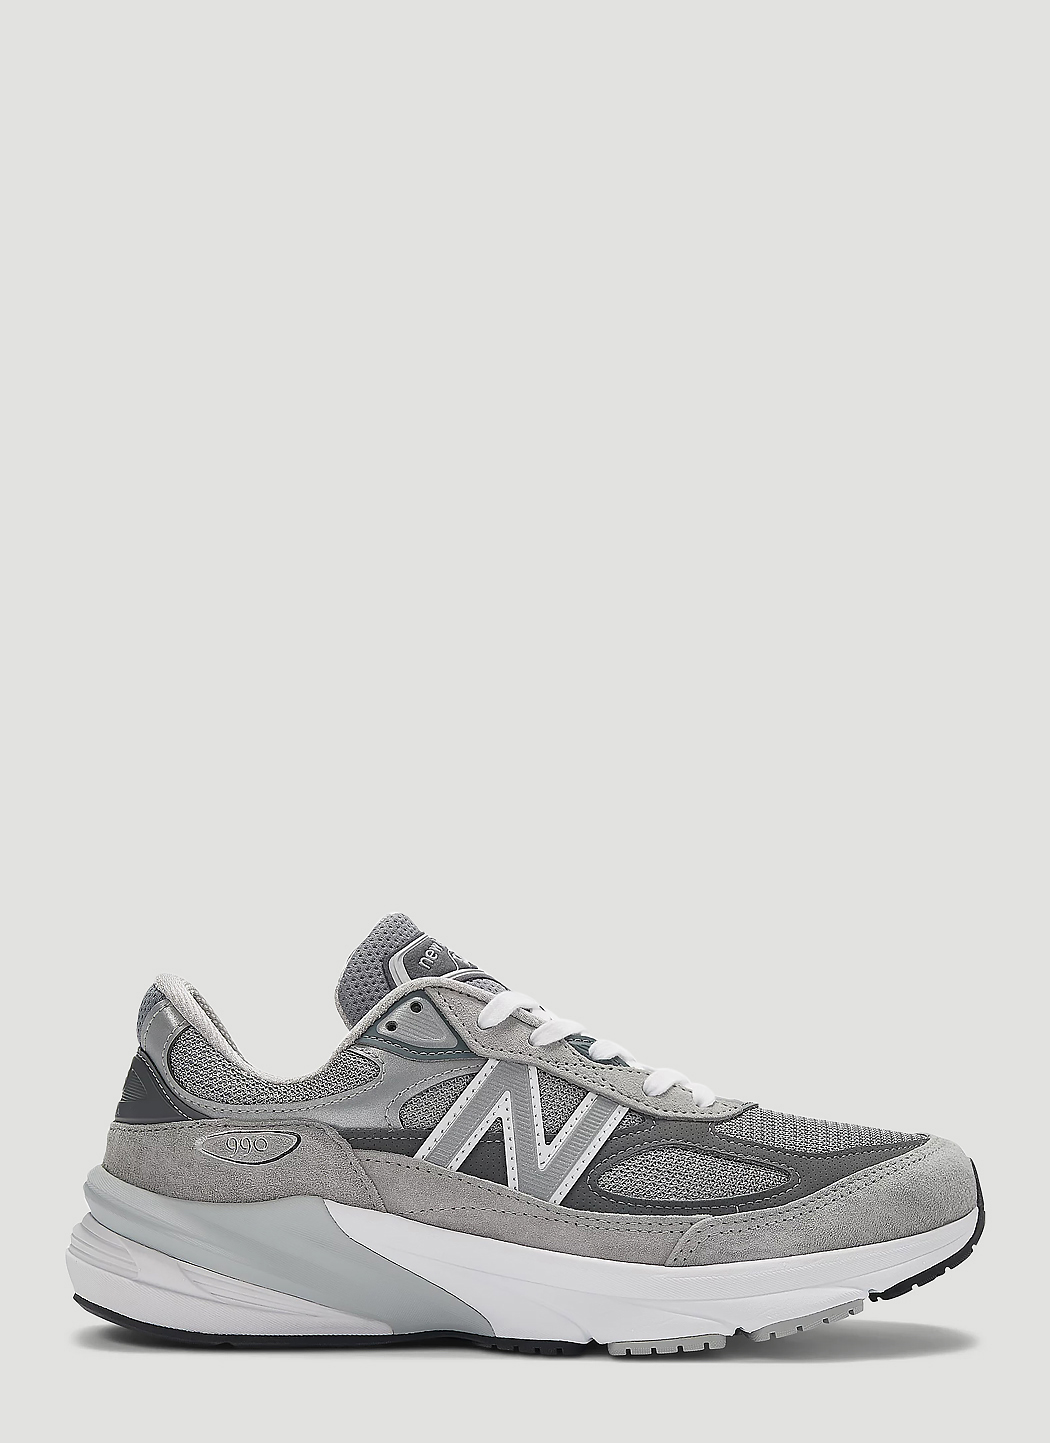 New Balance Made in USA 990v6 Sneakers